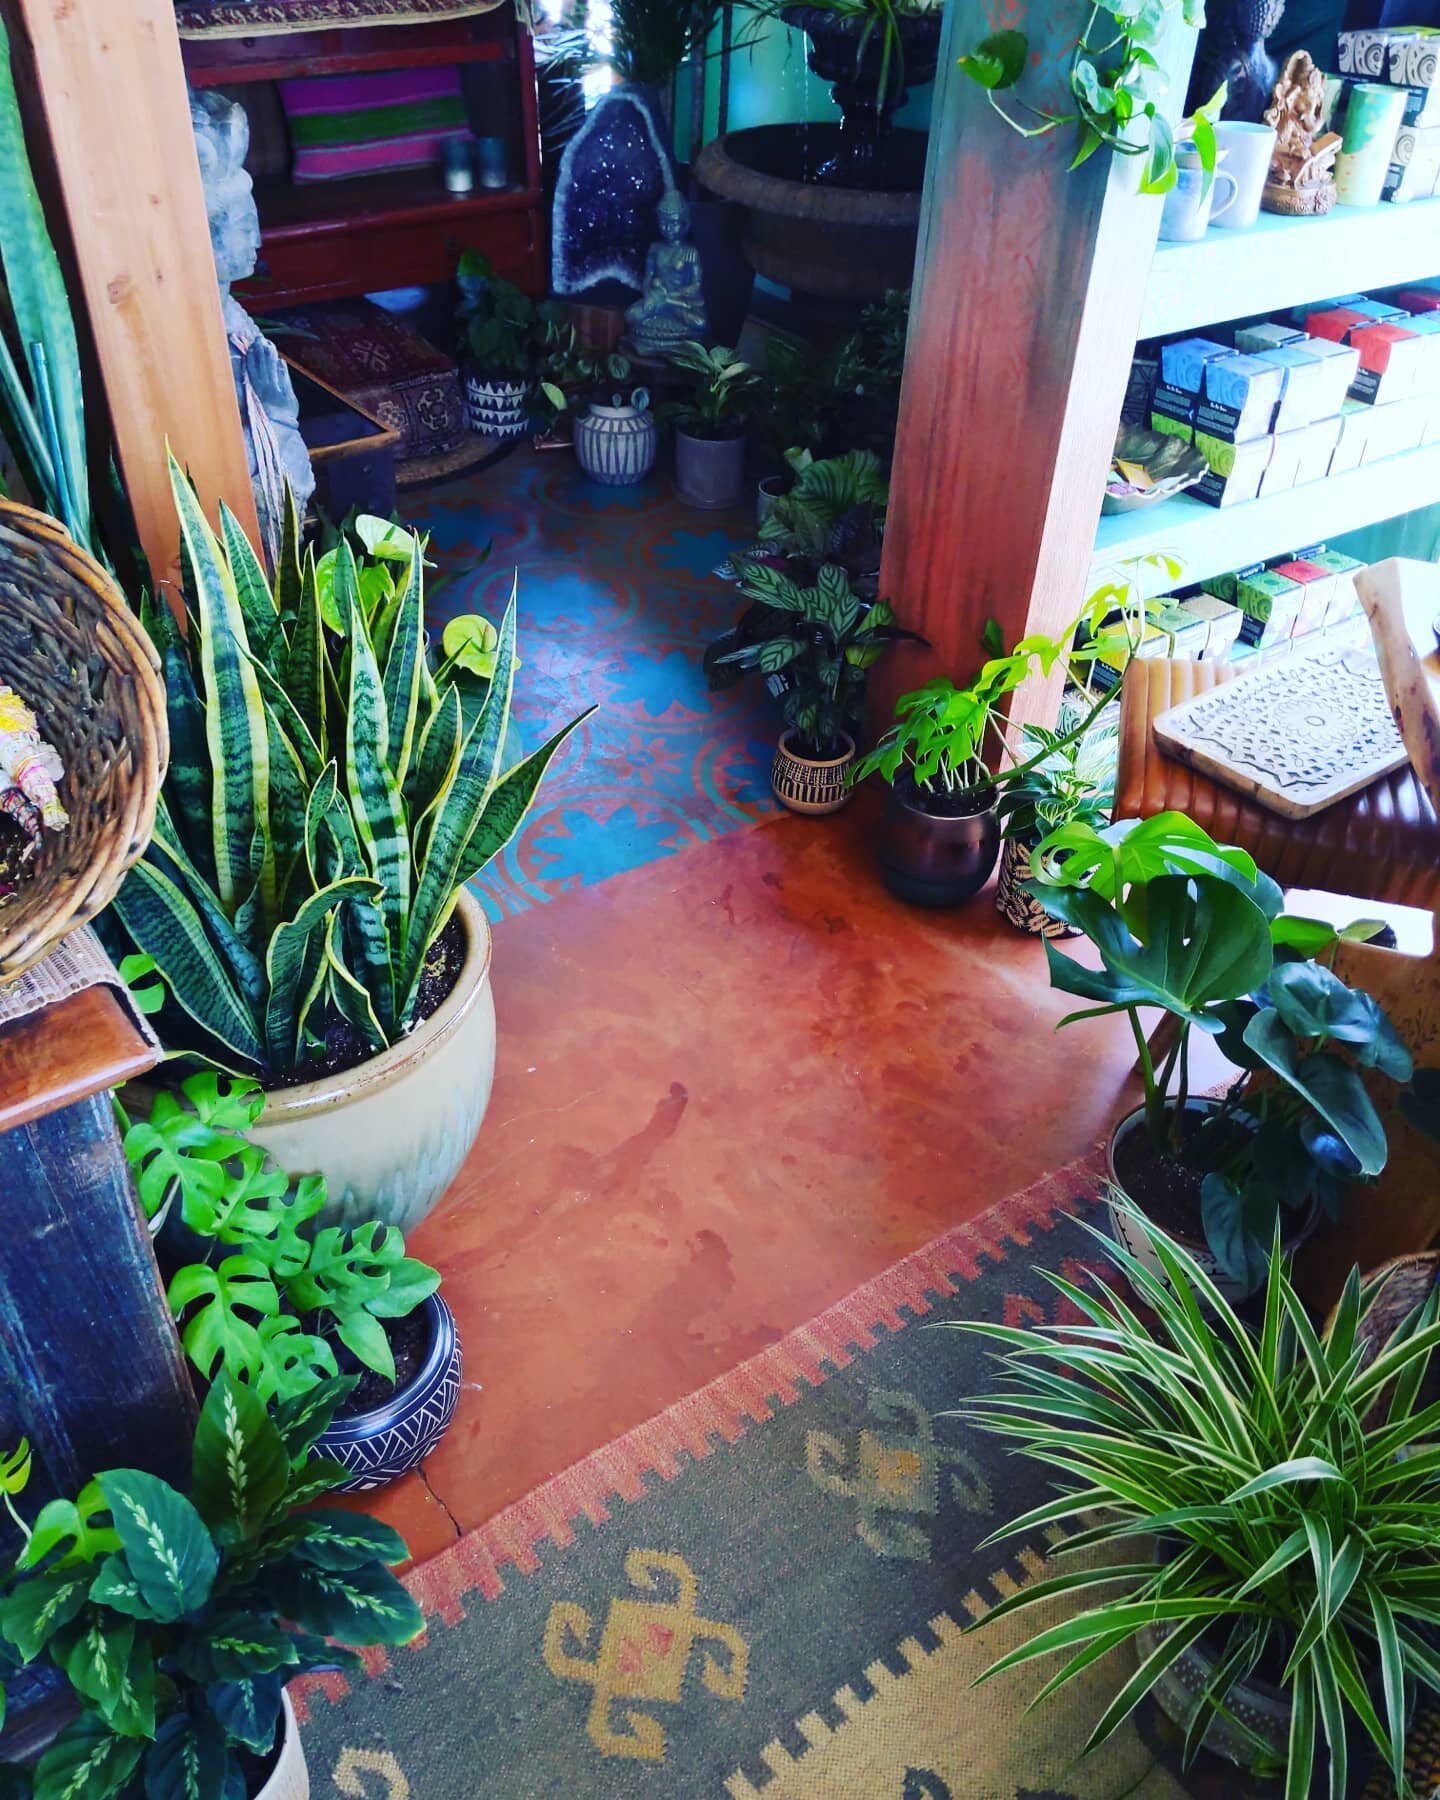 We have so many newpotted plants! 😎🌱🙌🏻
.
.
.
#liveleafsd #carlsbad #sanmarcos #vista #oceanside #sandiego #encinitas #northcountysandiego #giftgiving #giving #gifts #shoplocal #shopsmall #smallbusiness #smallbusinesssupport #smallbusinesssaturday